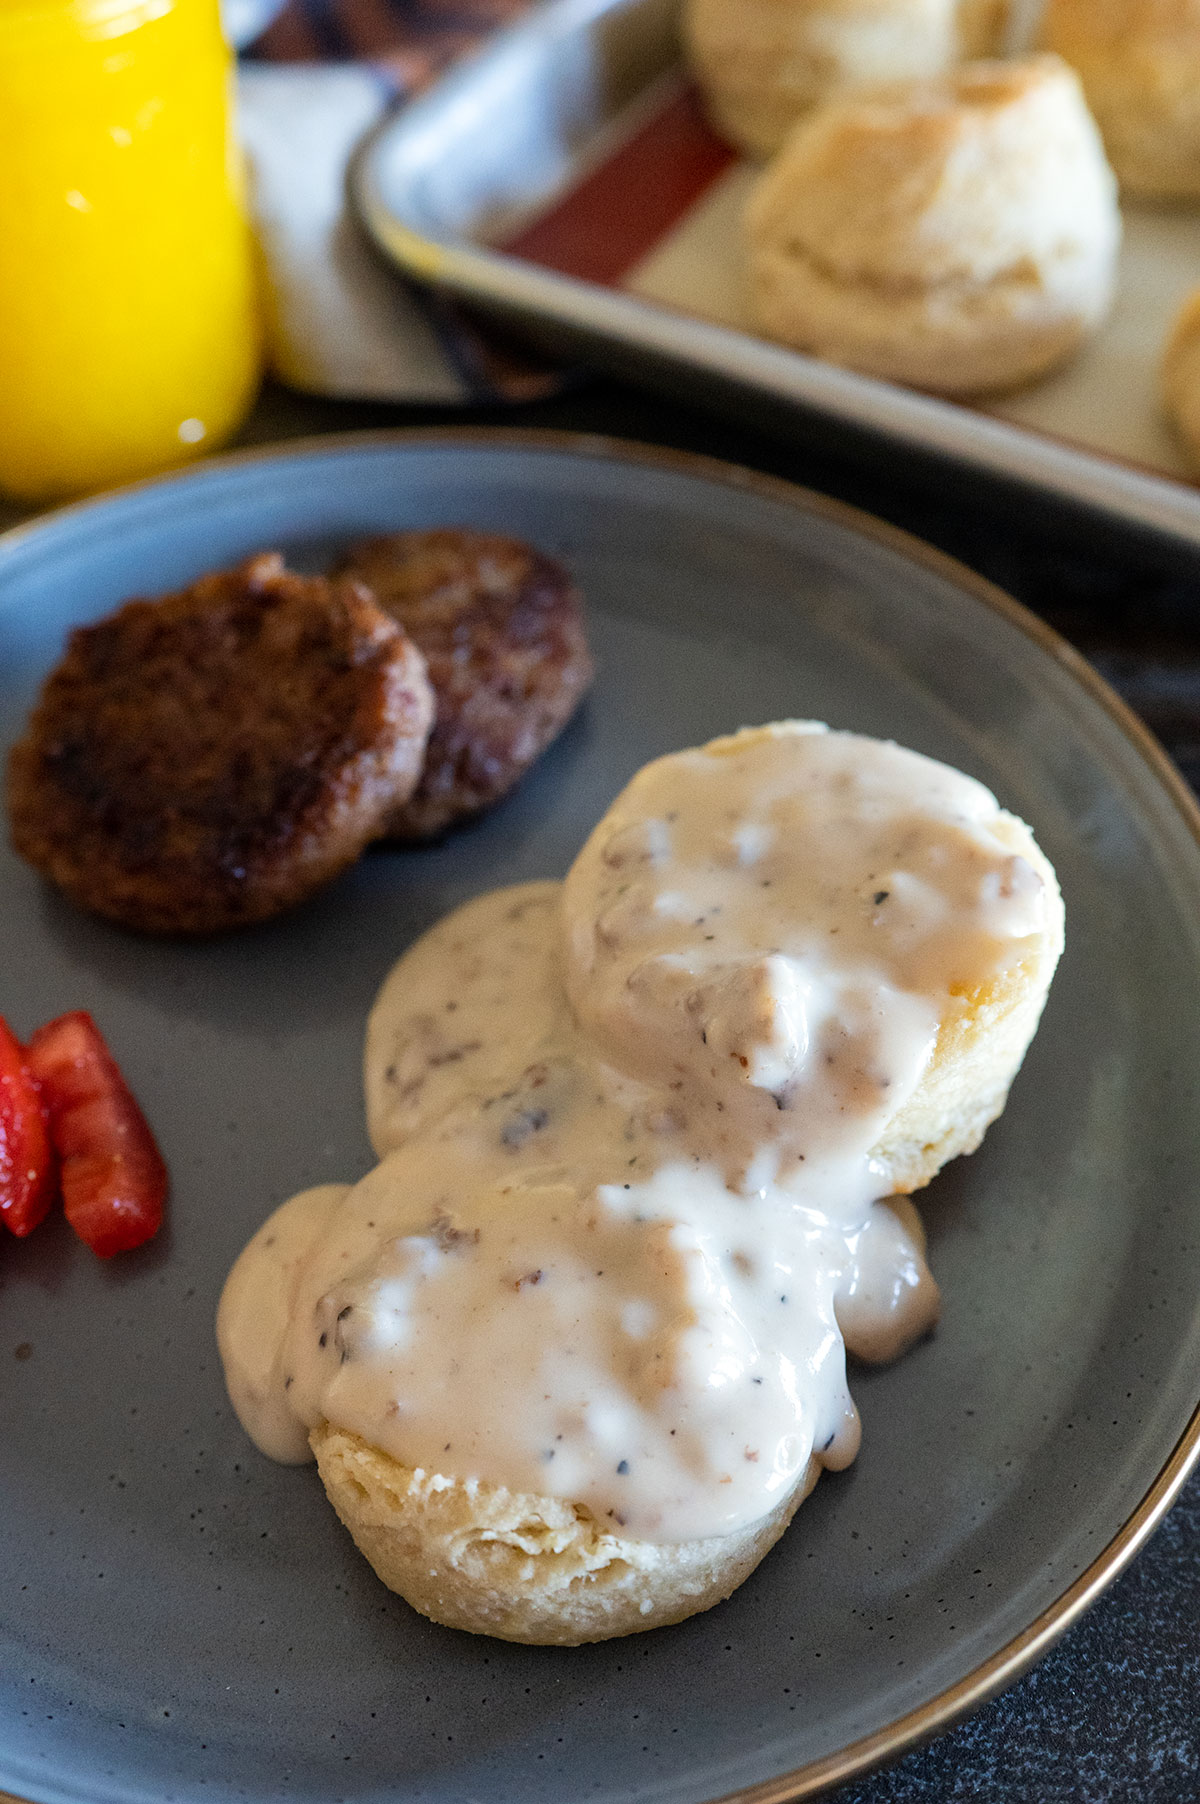 biscuits and gravy with sausage and tomatoes.